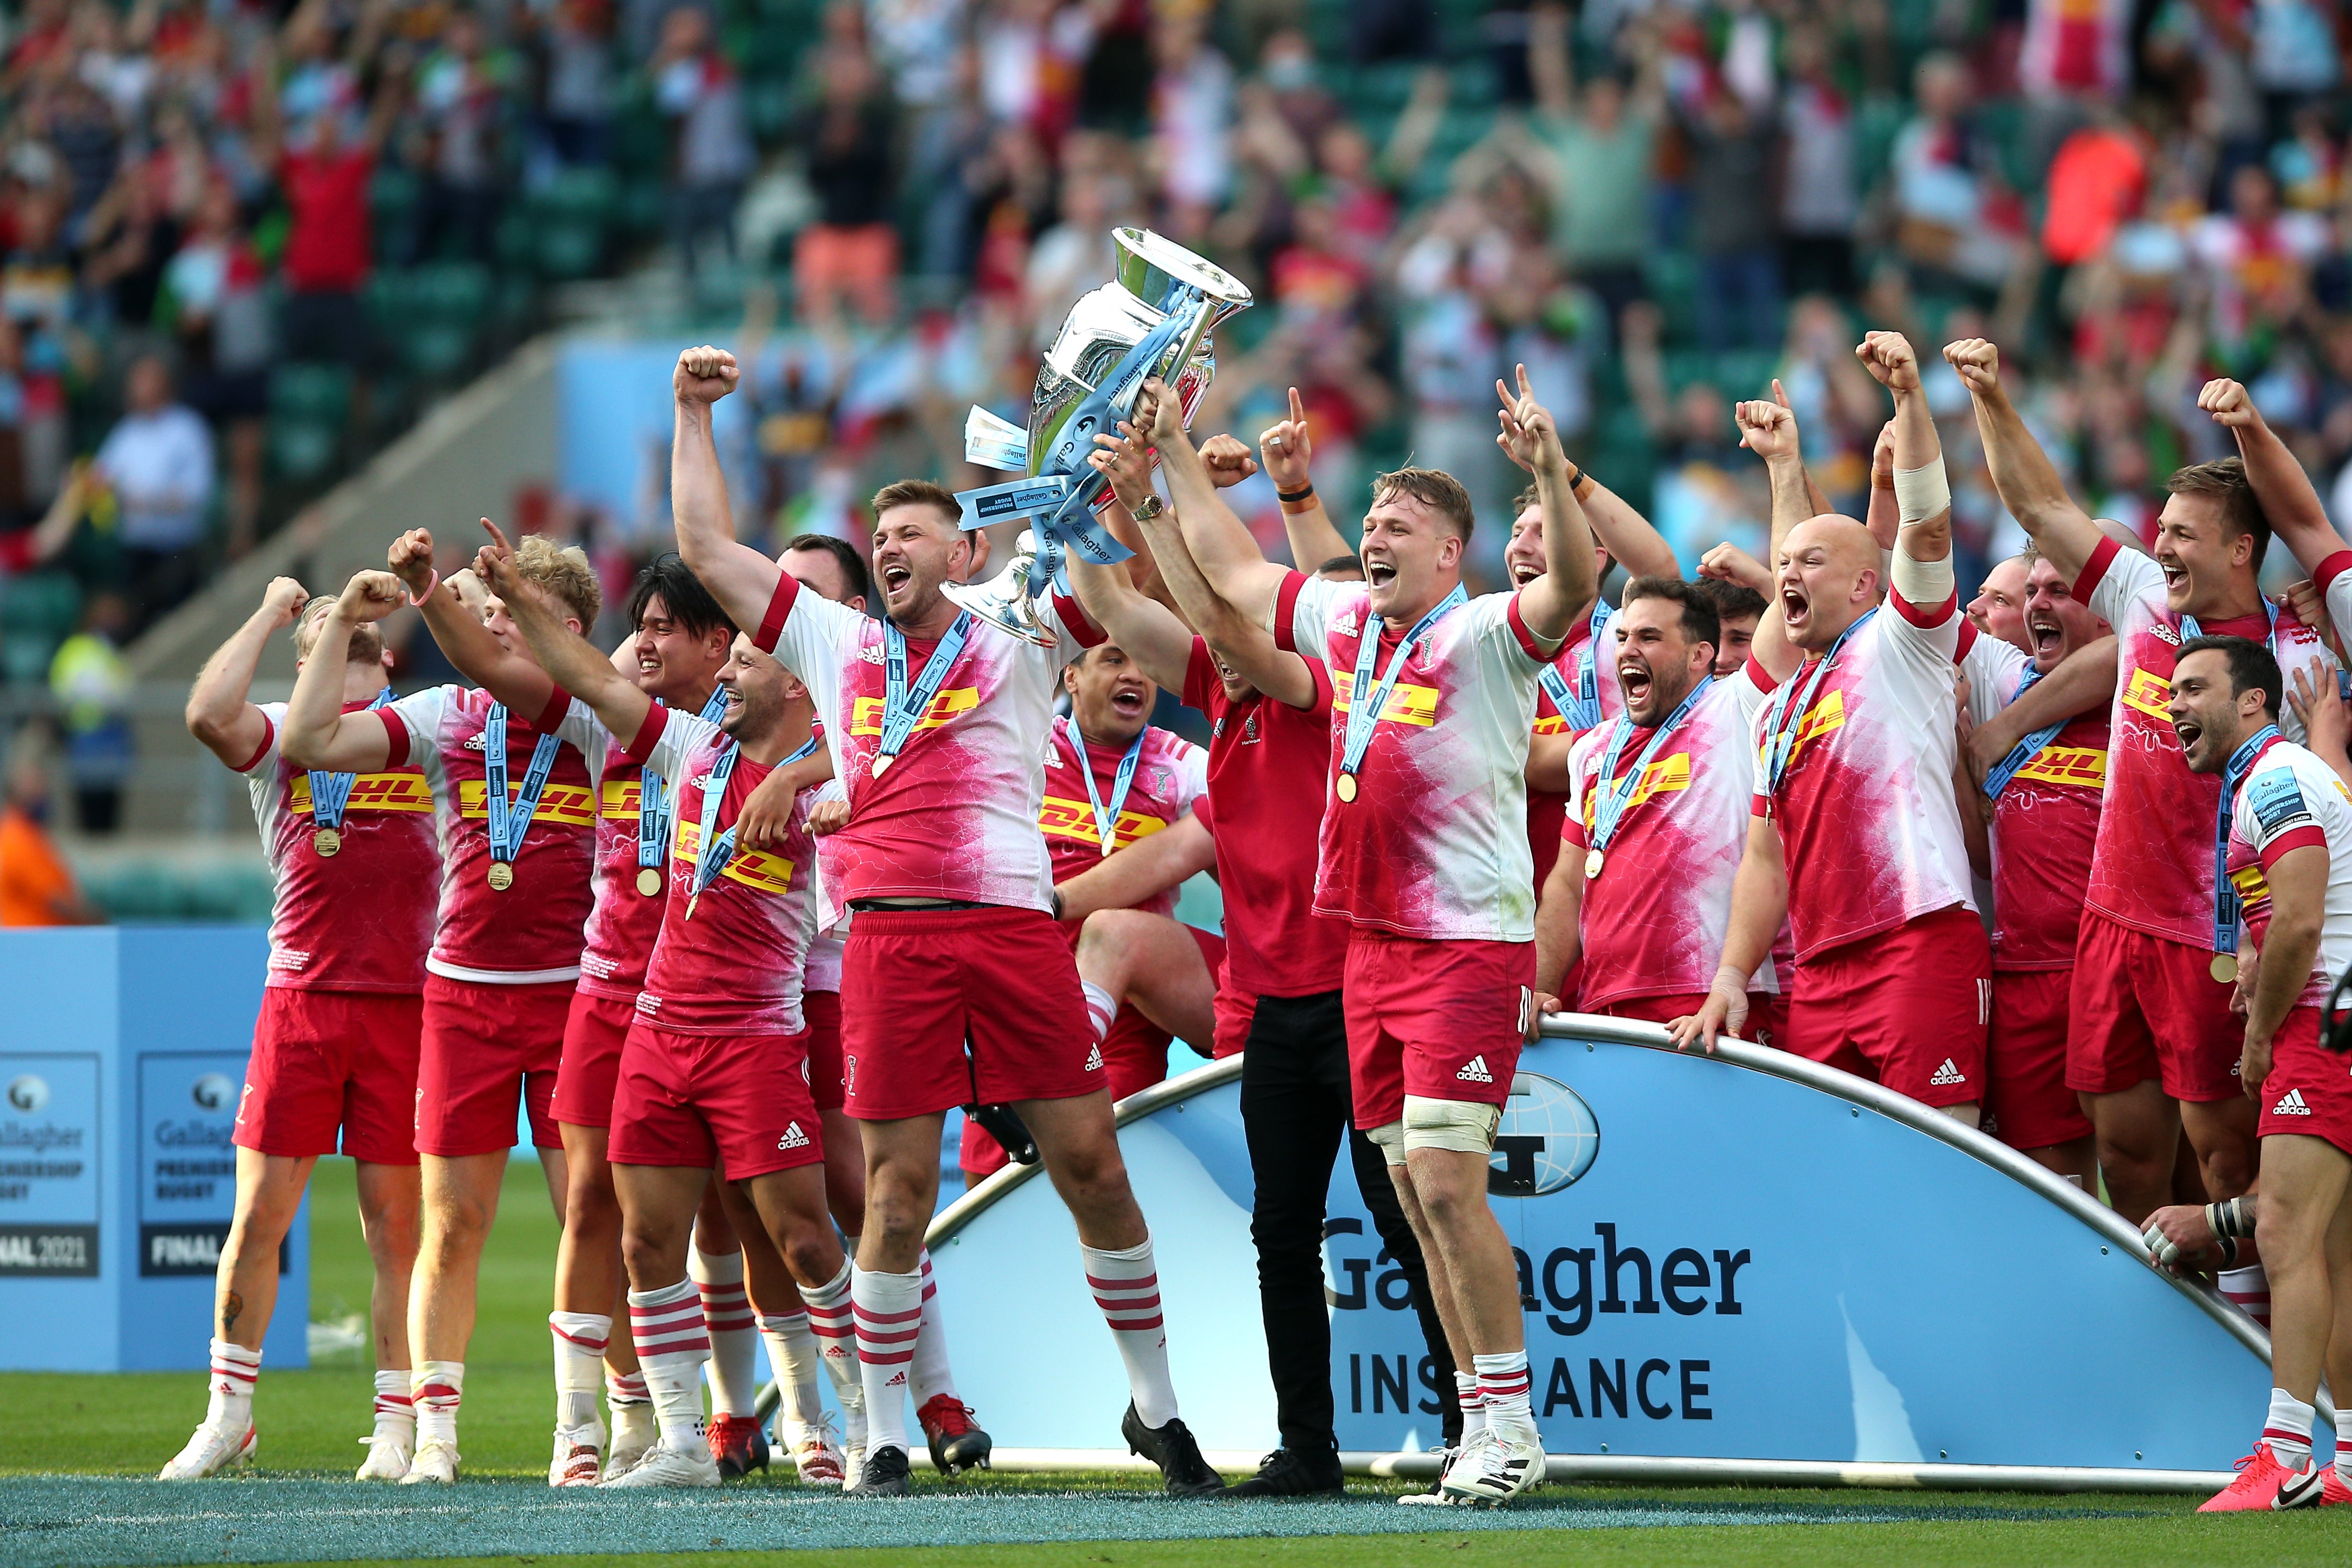 Harlequins won the Premiership title playing a thrilling brand of rugby (Nigel French/PA)